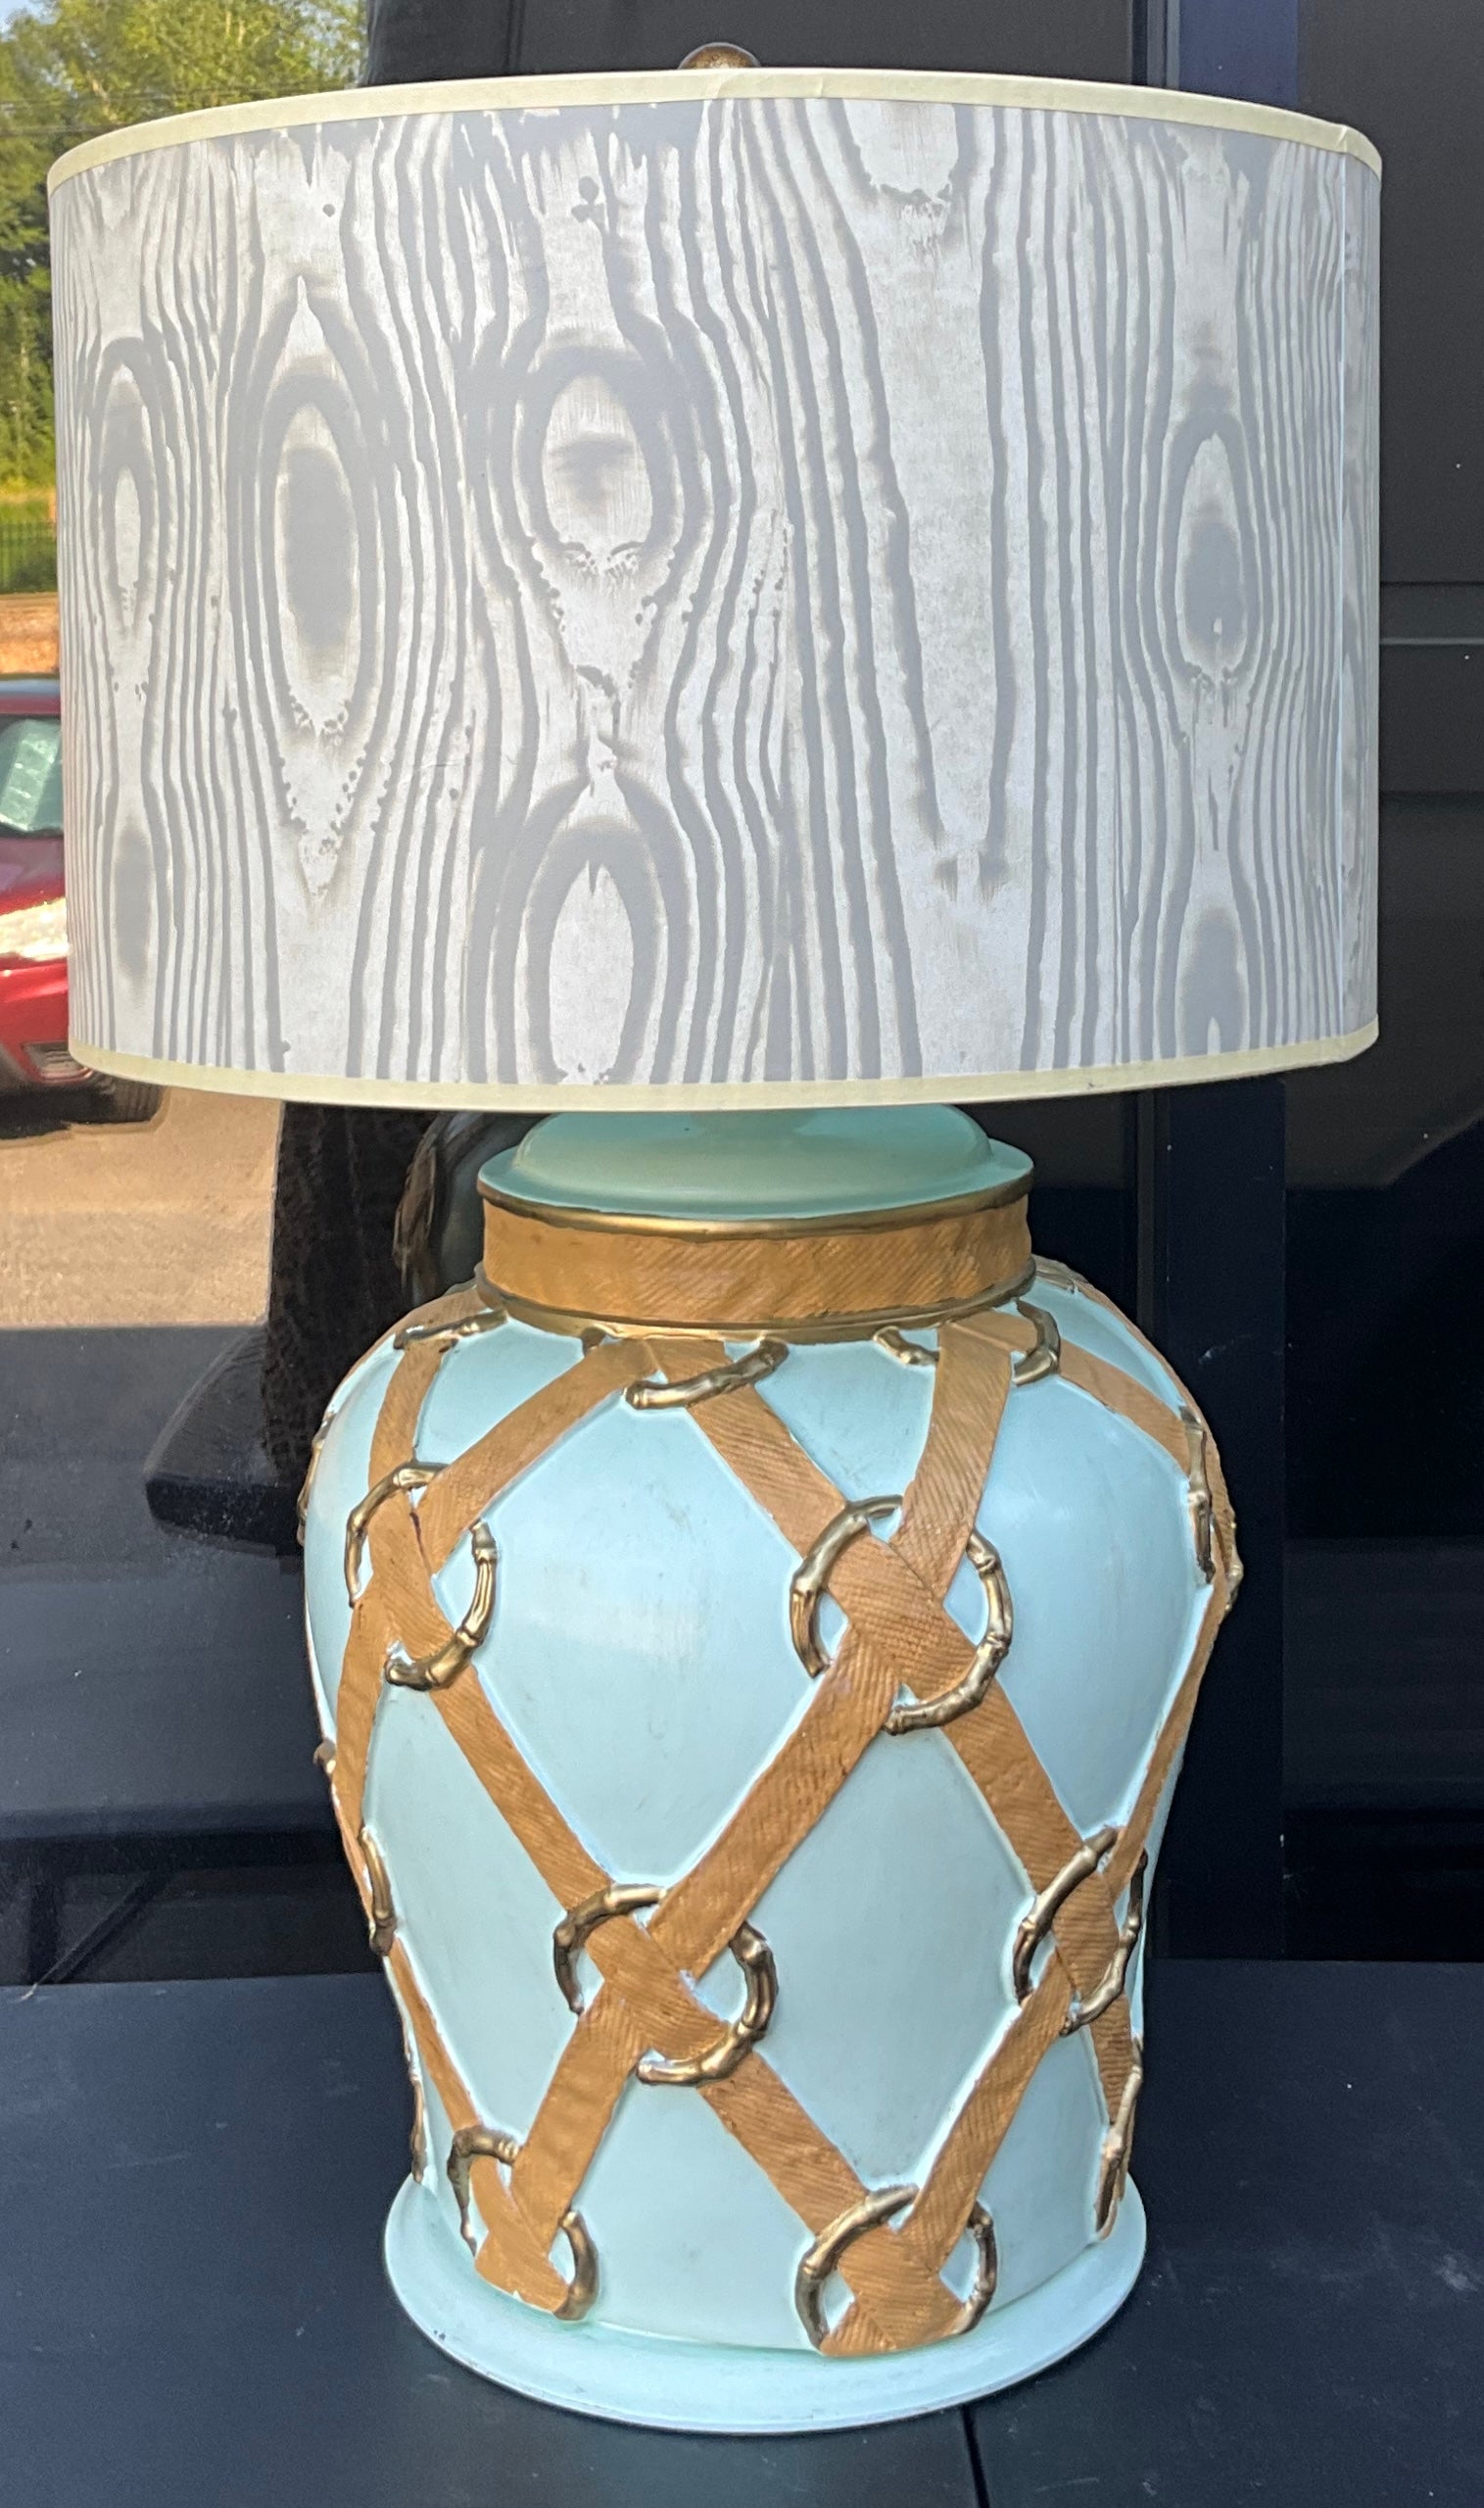 I love this lamp! It is an equestrian inspired lamp with faux bois drum shade. It is a large ceramic base with faux bamboo rings woven with a faux canvas ribbon. The shade is paper with a faux bois theme. Sadly, there is a slight dent. The color is